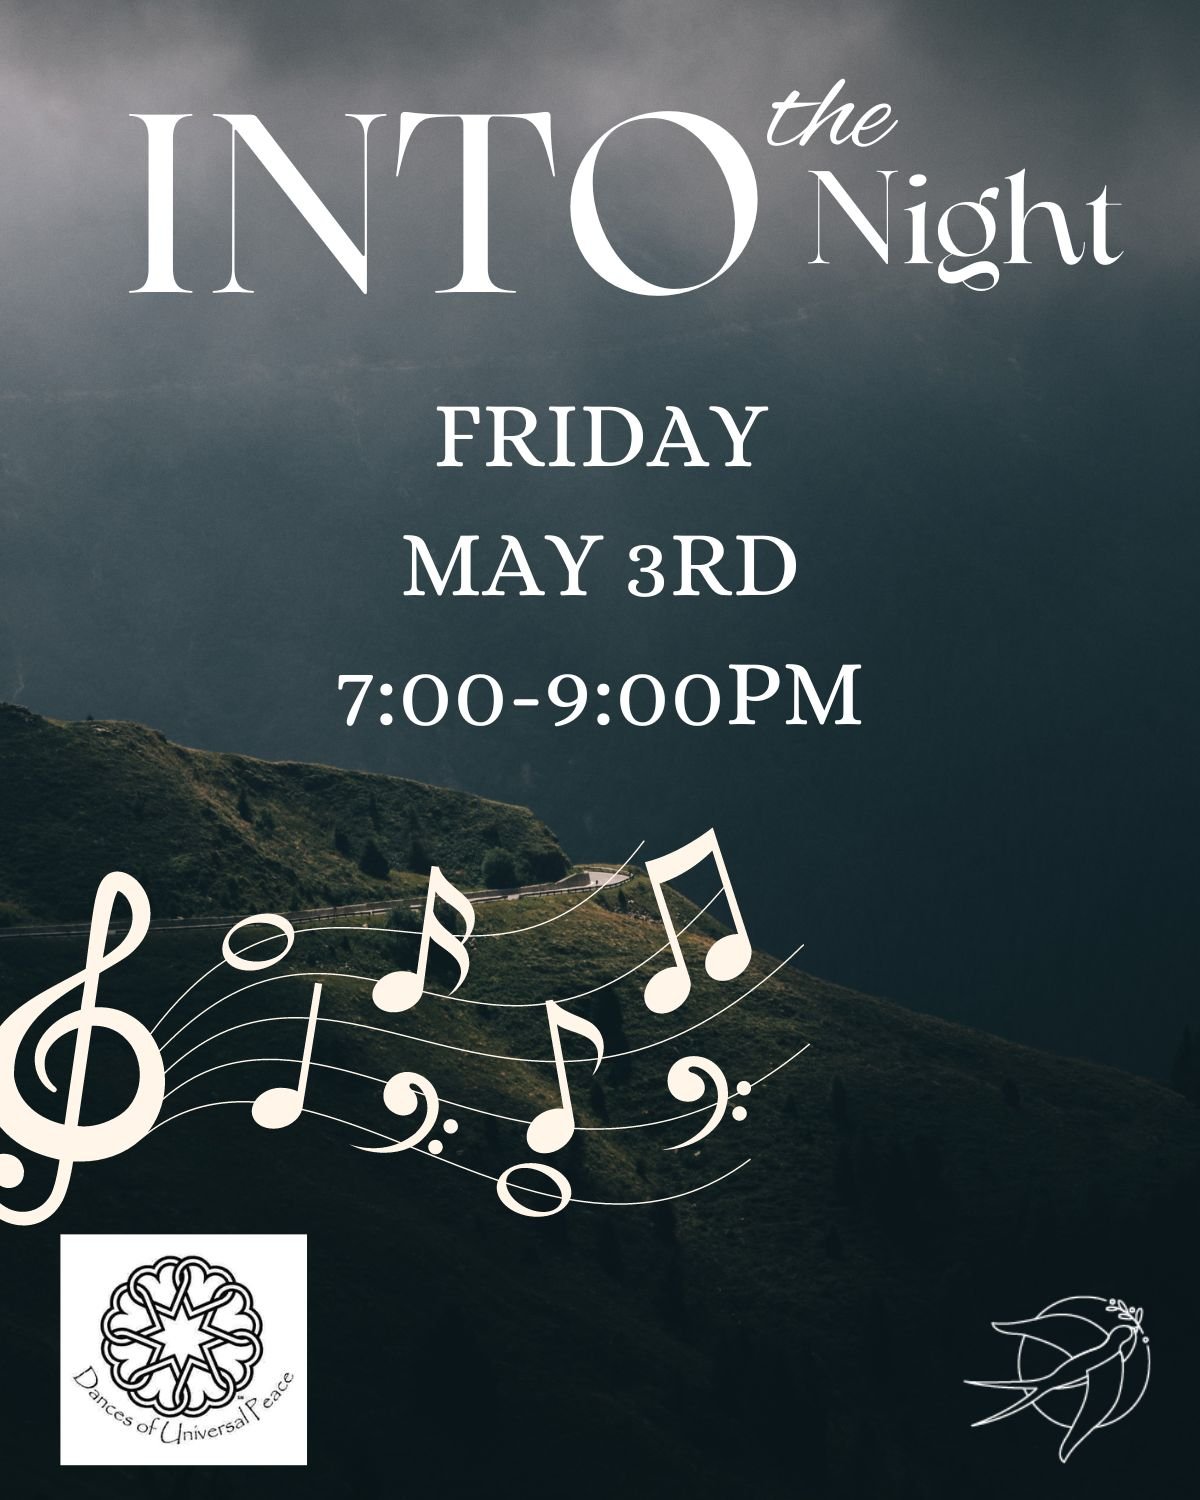 FRIDAY, MAY 3RD
7:00-9:00 PM
🌒
Join in for a celebratory 2-hour participatory musical offering. Dances of Universal Peace and Universal Kirtan into the night! These practices encourage sovereignty while sharing space with others and no experience is